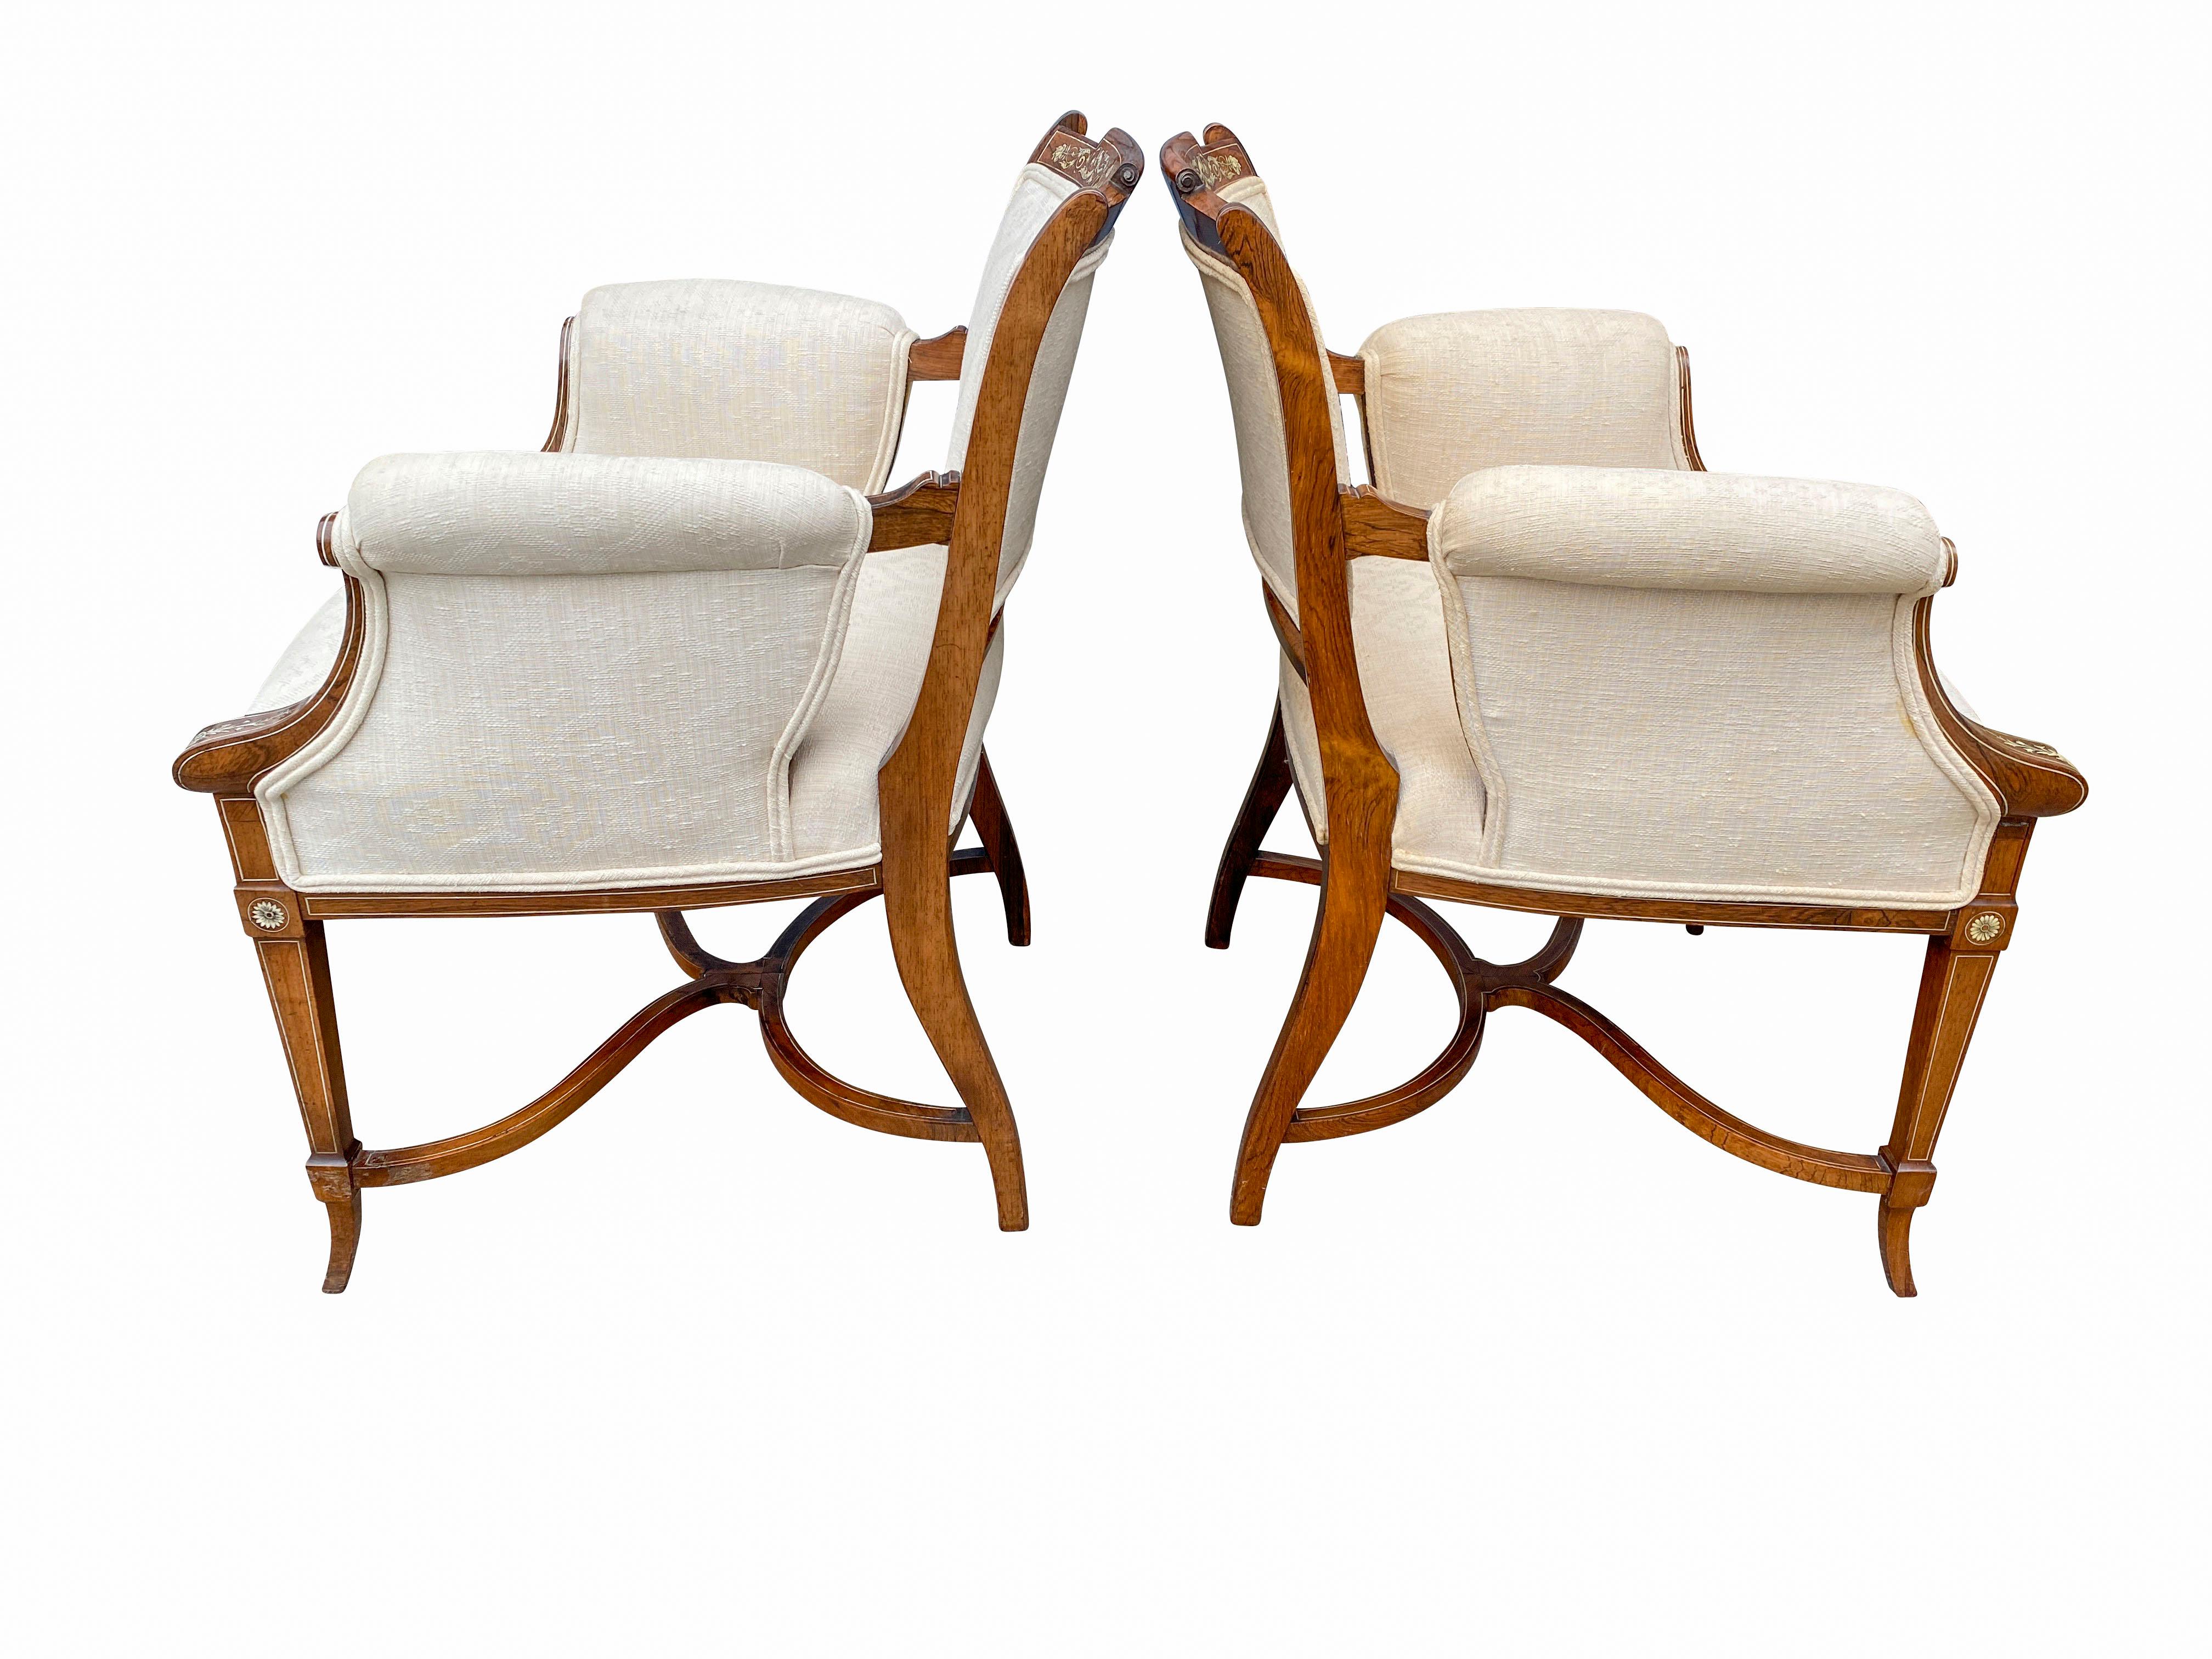 English Pair of Anglo-Japanese Rosewood and Inlaid Armchairs, Collinson & Lock